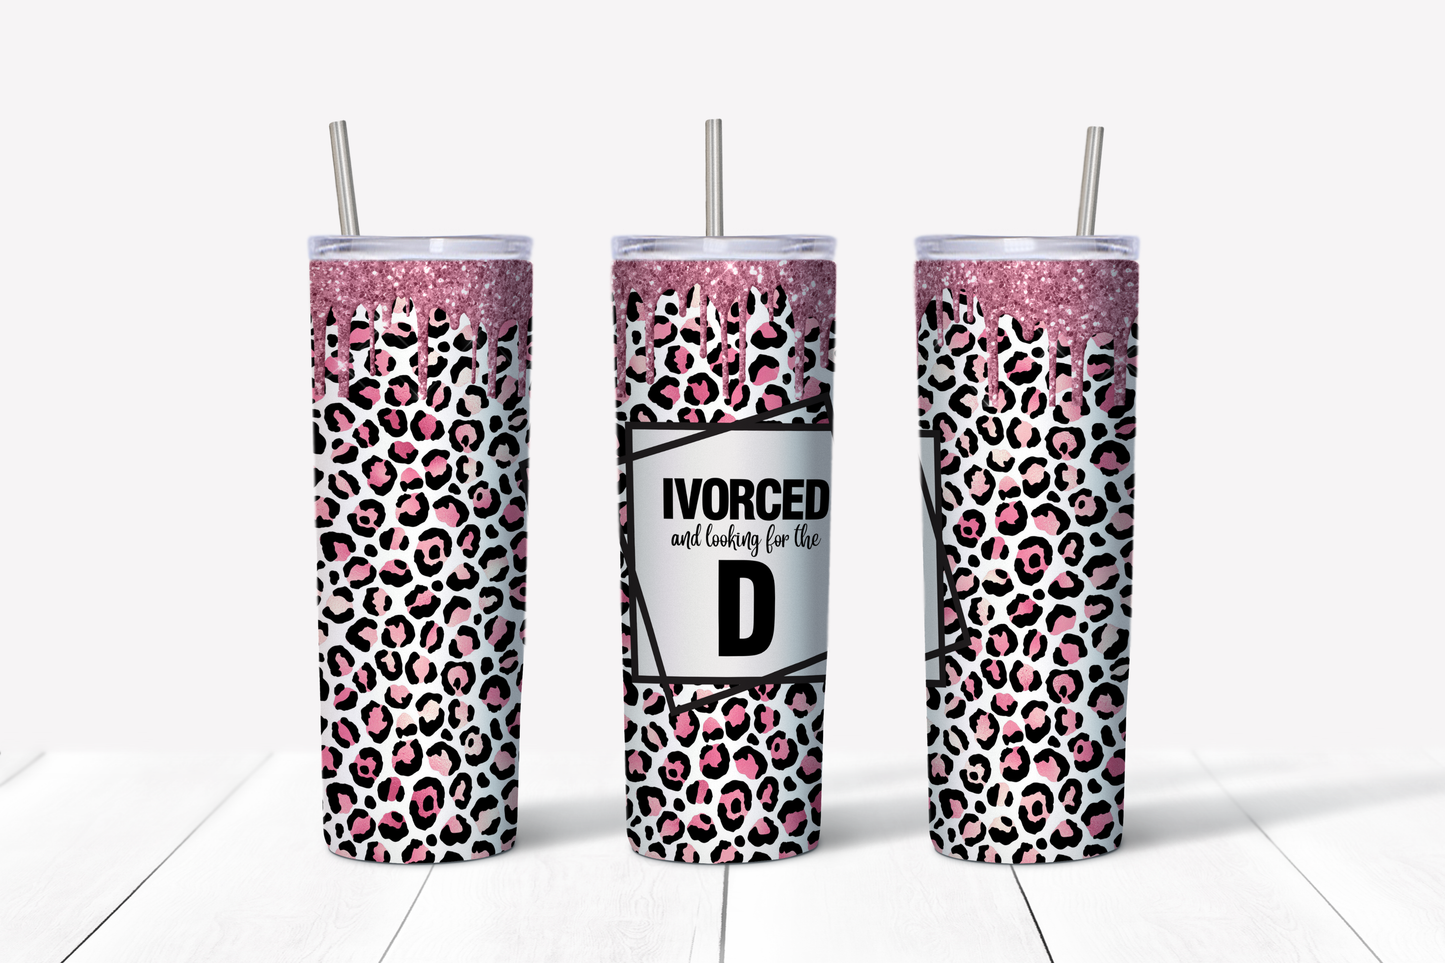 ivorced and Looking for the D (Pink) Divorced 20 oz Tumbler